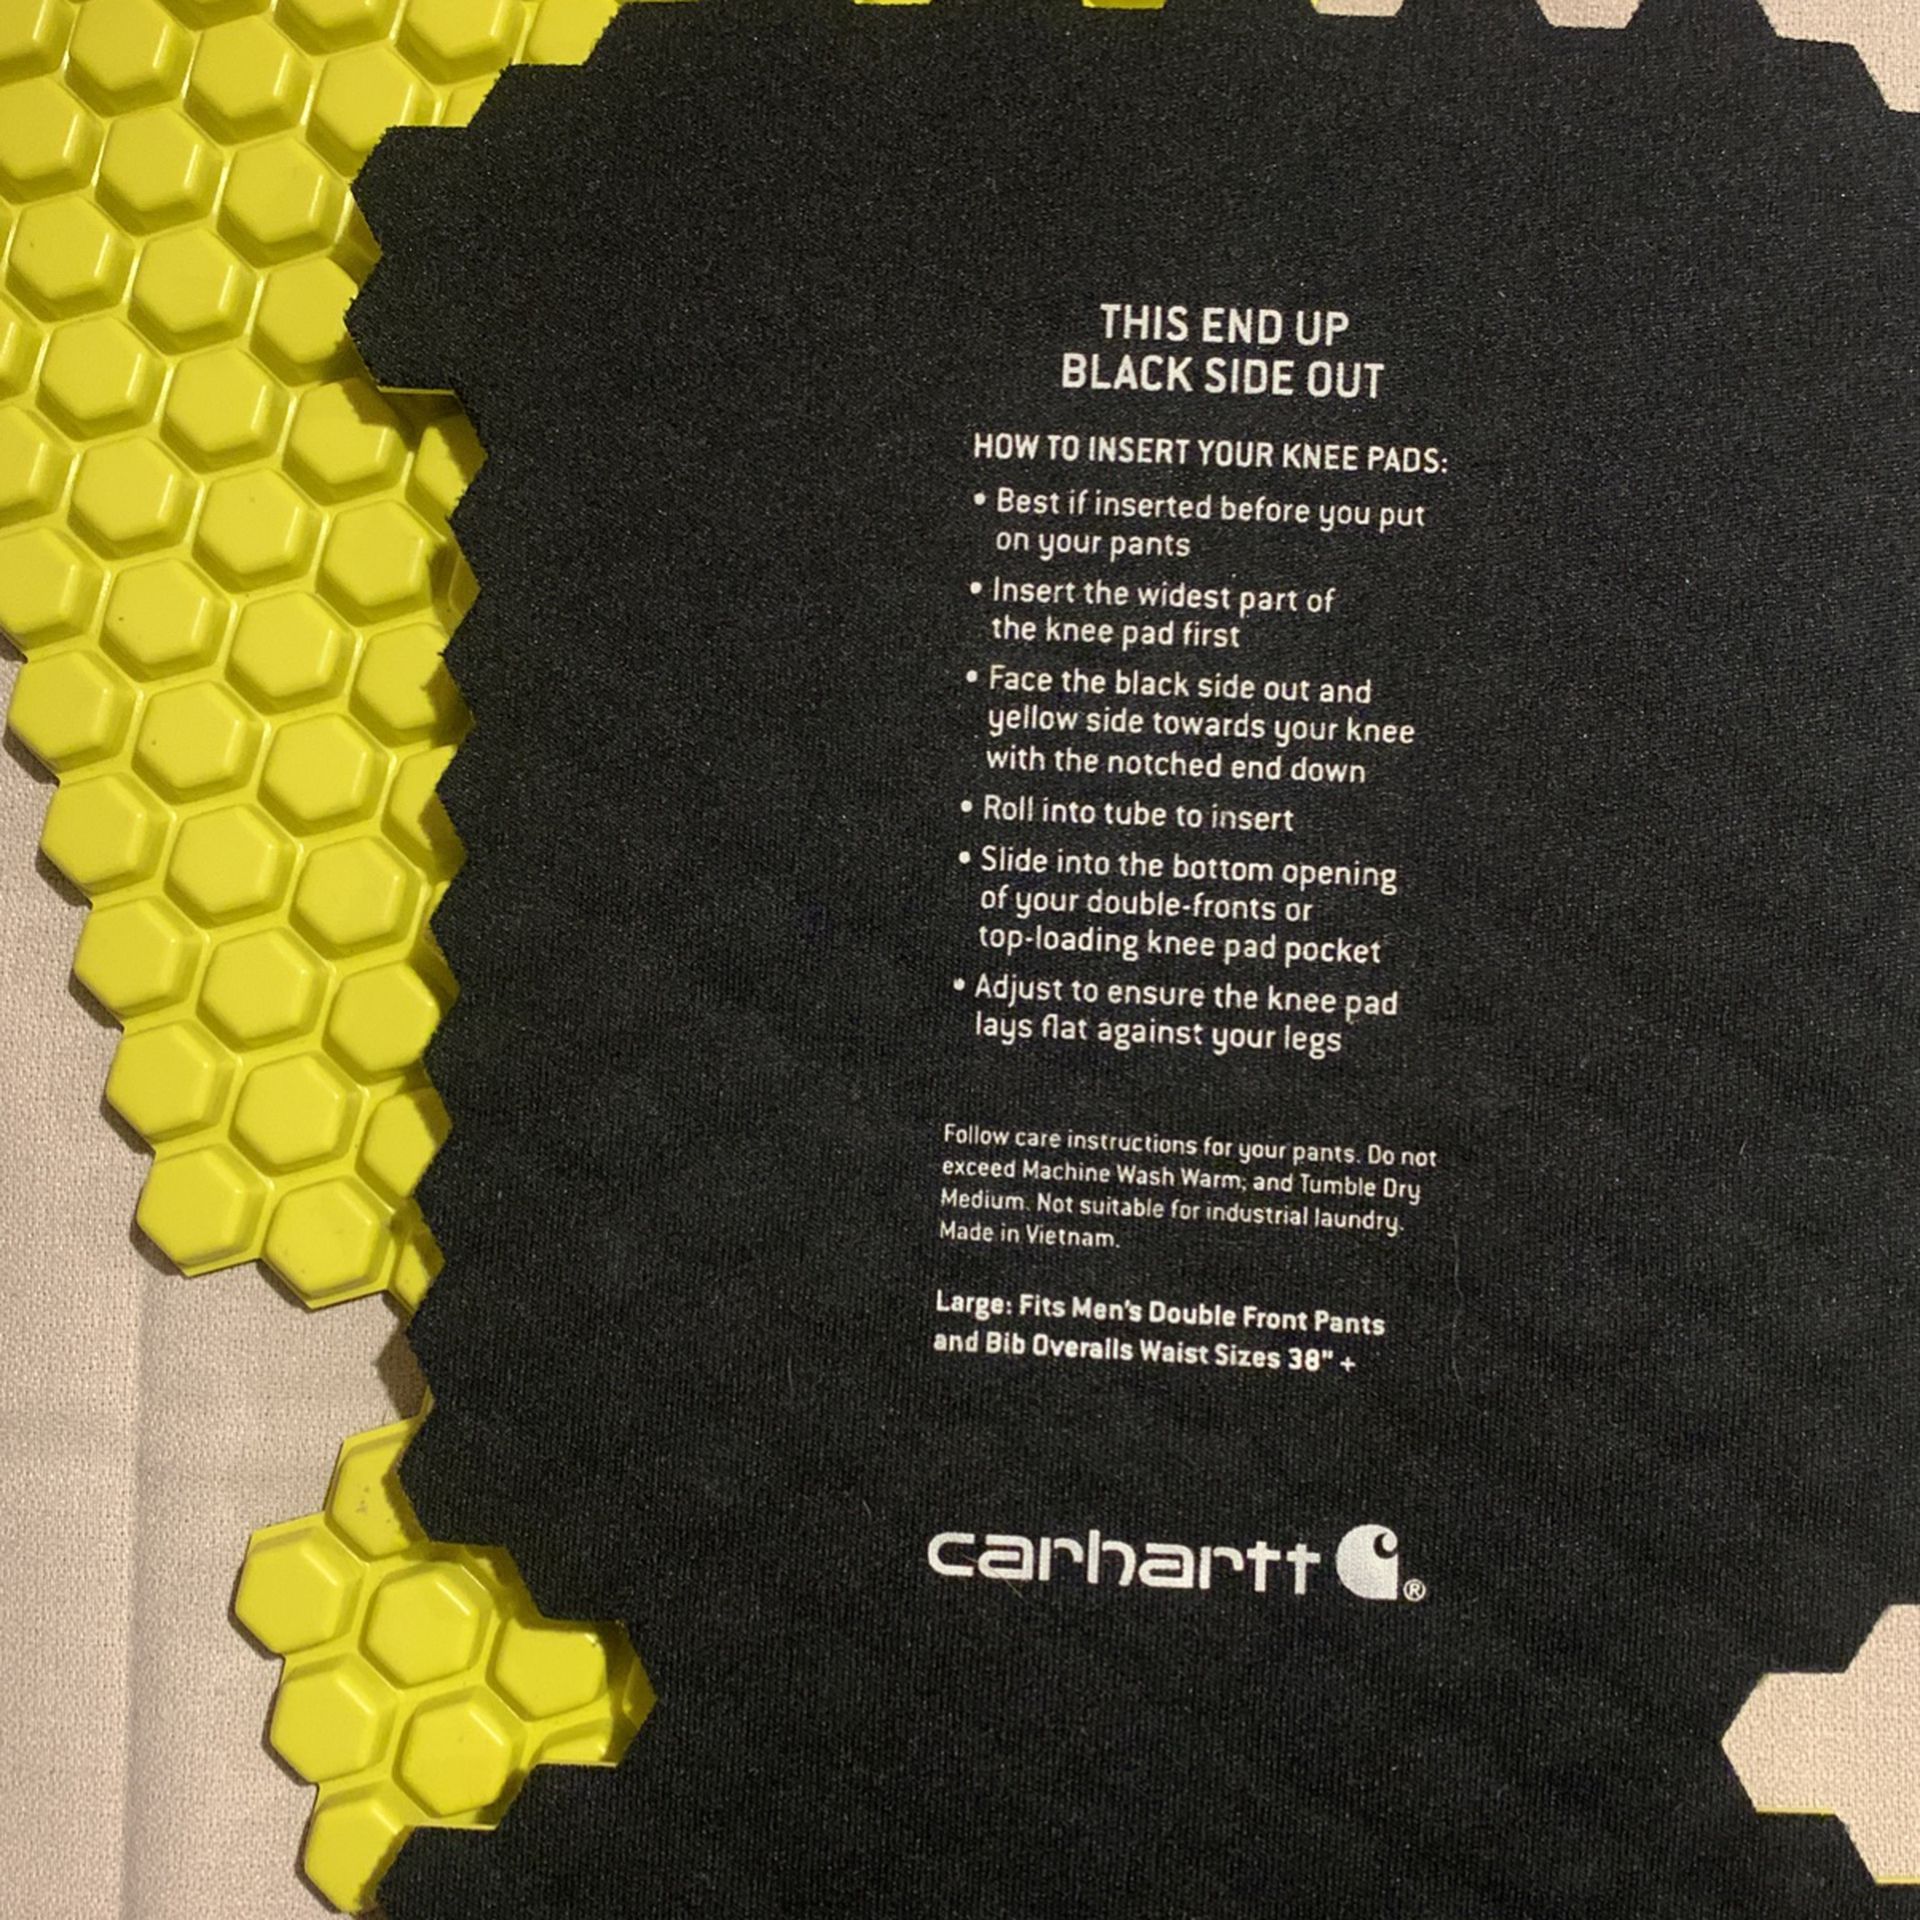 Carhartt Knee Pad Inserts Lrg Size 38+ for Sale in Long Beach, CA